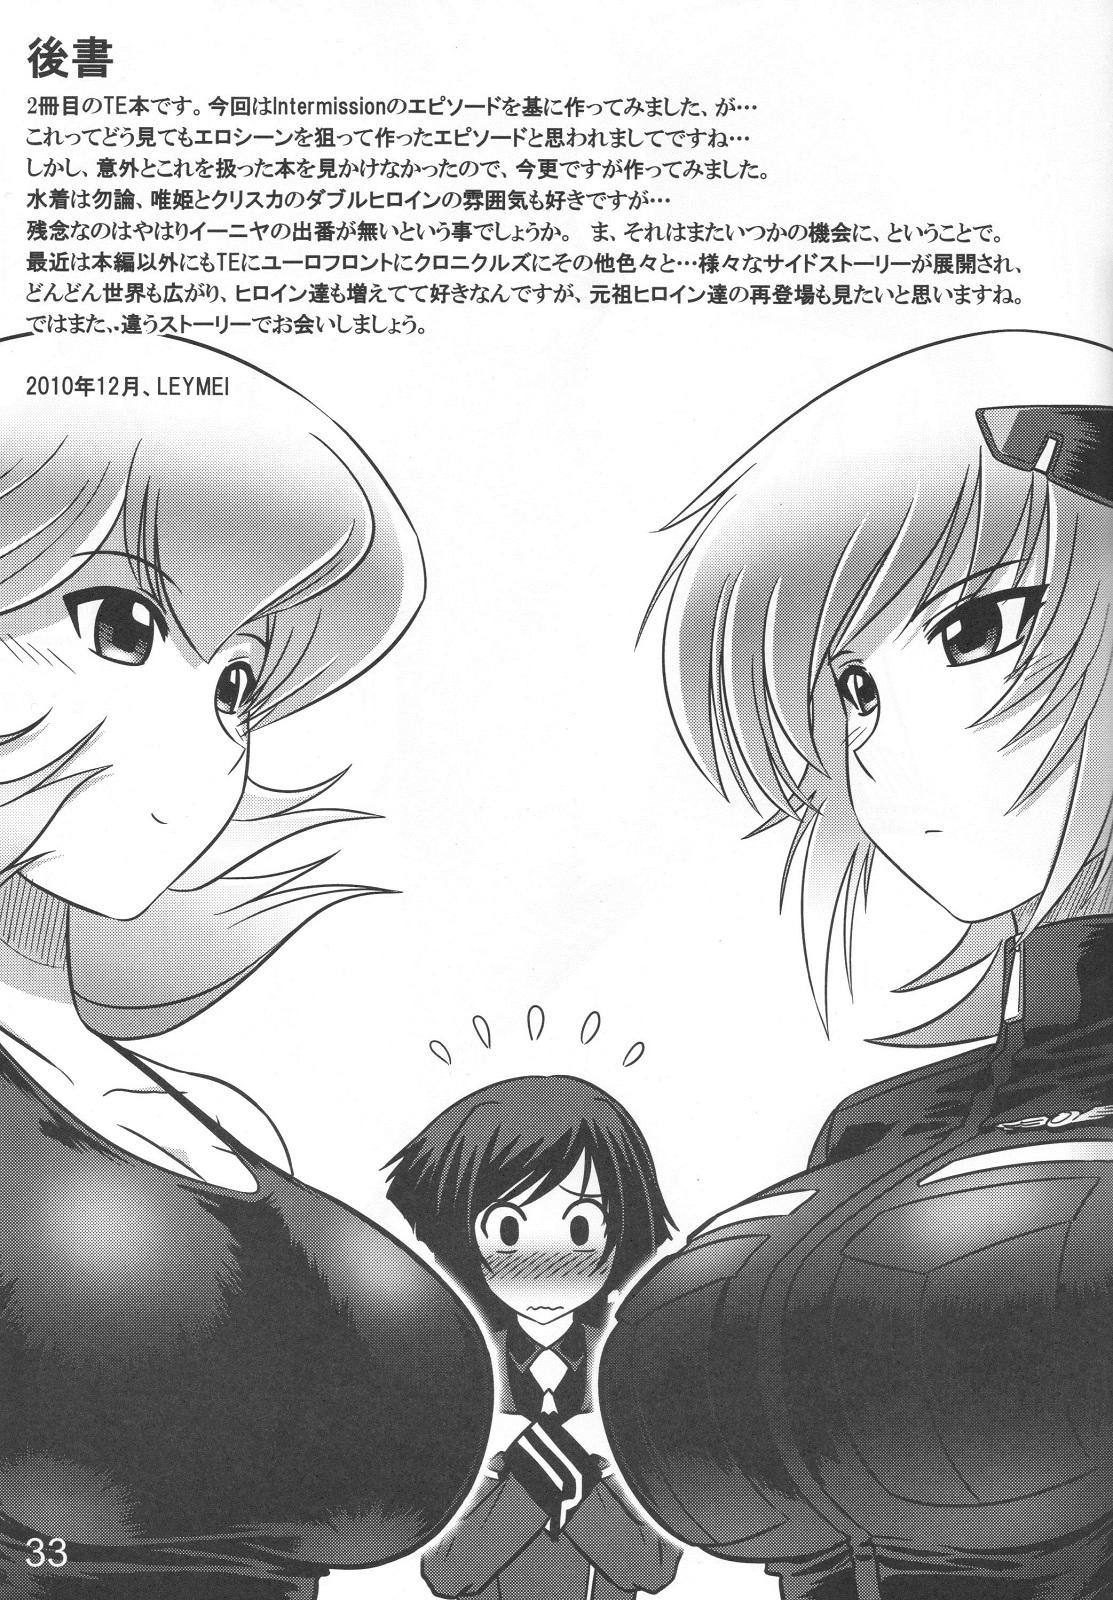 Mms Intermission H - Muv luv alternative total eclipse One - Page 33